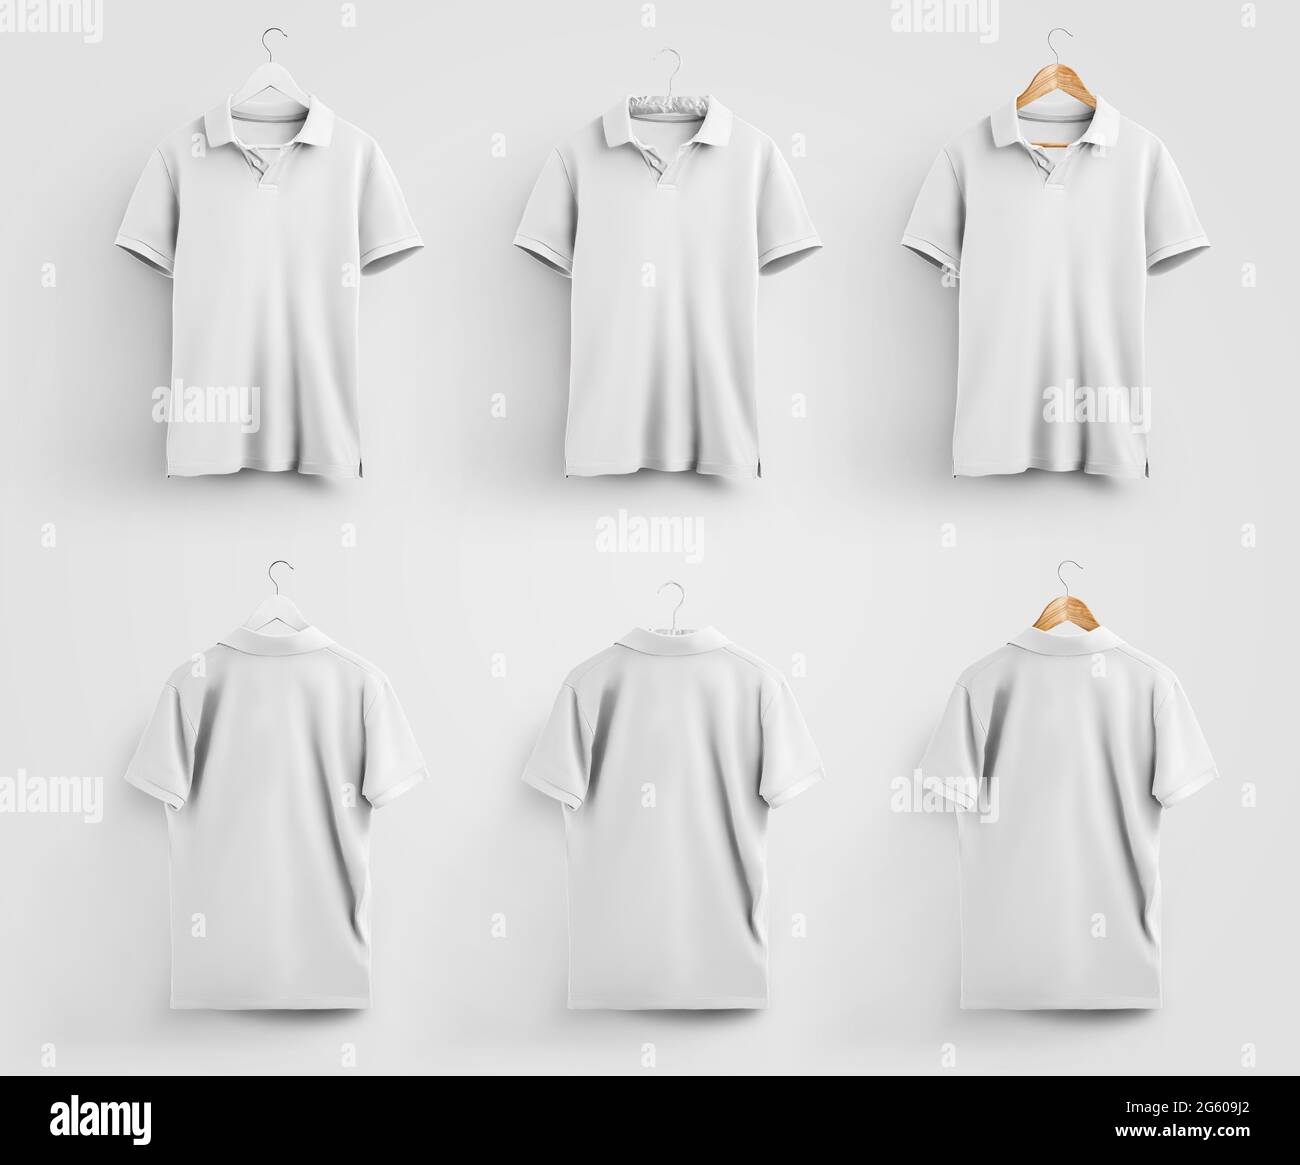 Template of white men's polo t-shirt; hanging on different hangers, front and back views, for presentation of design and advertising in an online stor Stock Photo